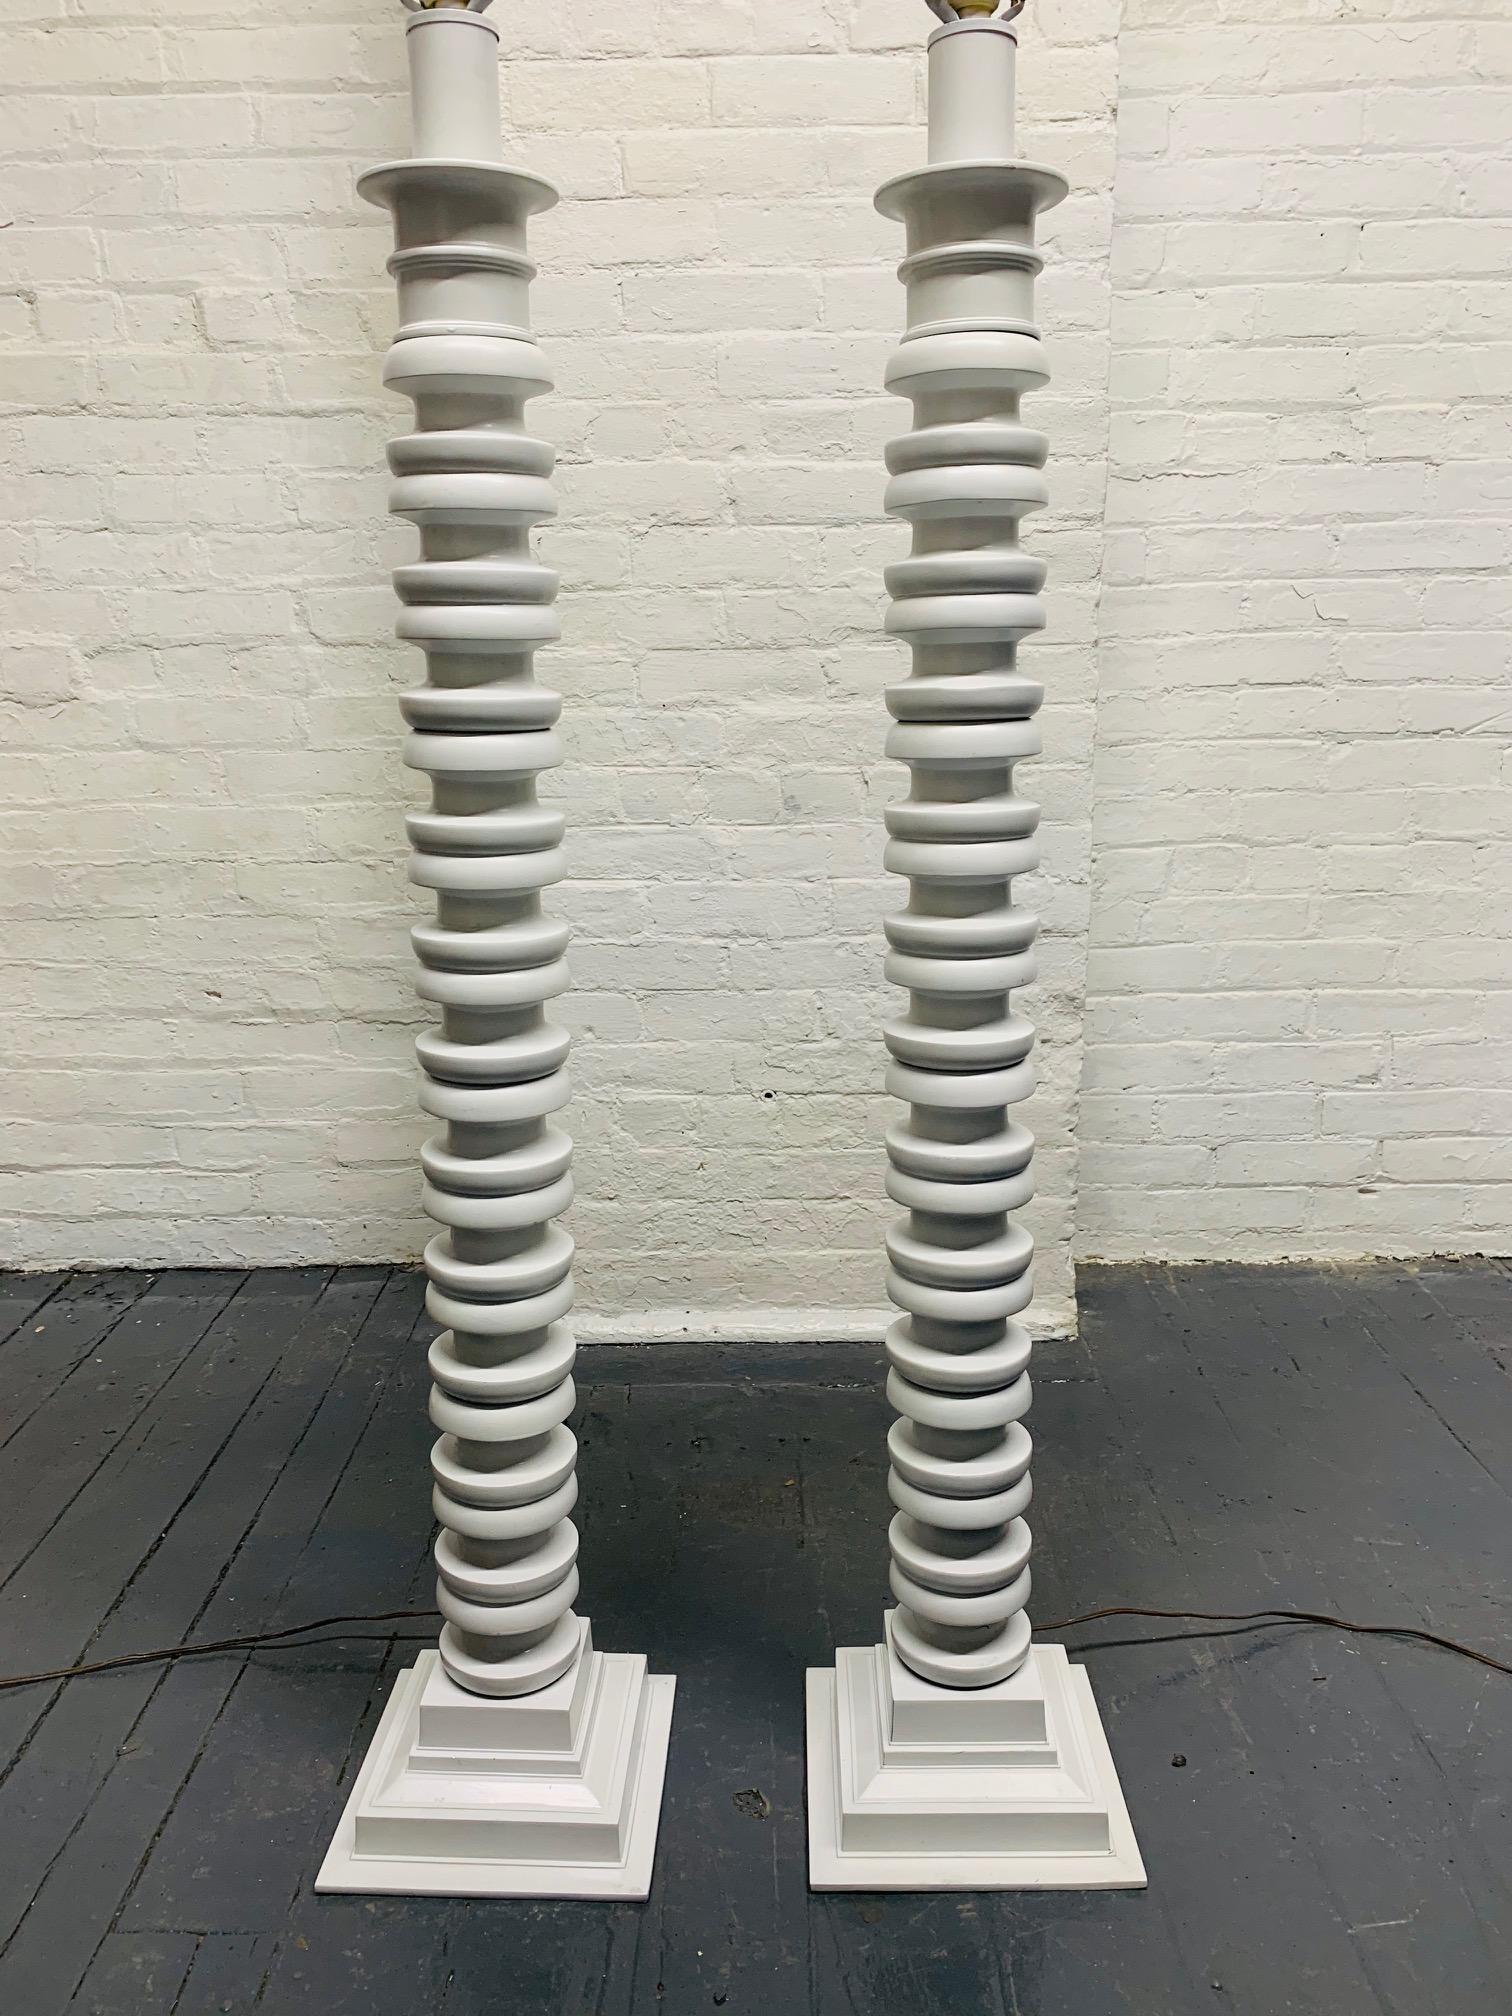 Pair of sculptural floor lamps. Lamps have a white lacquered finish.
Measures: 46 height (to under bulb socket). Base: 9 x 9.
  